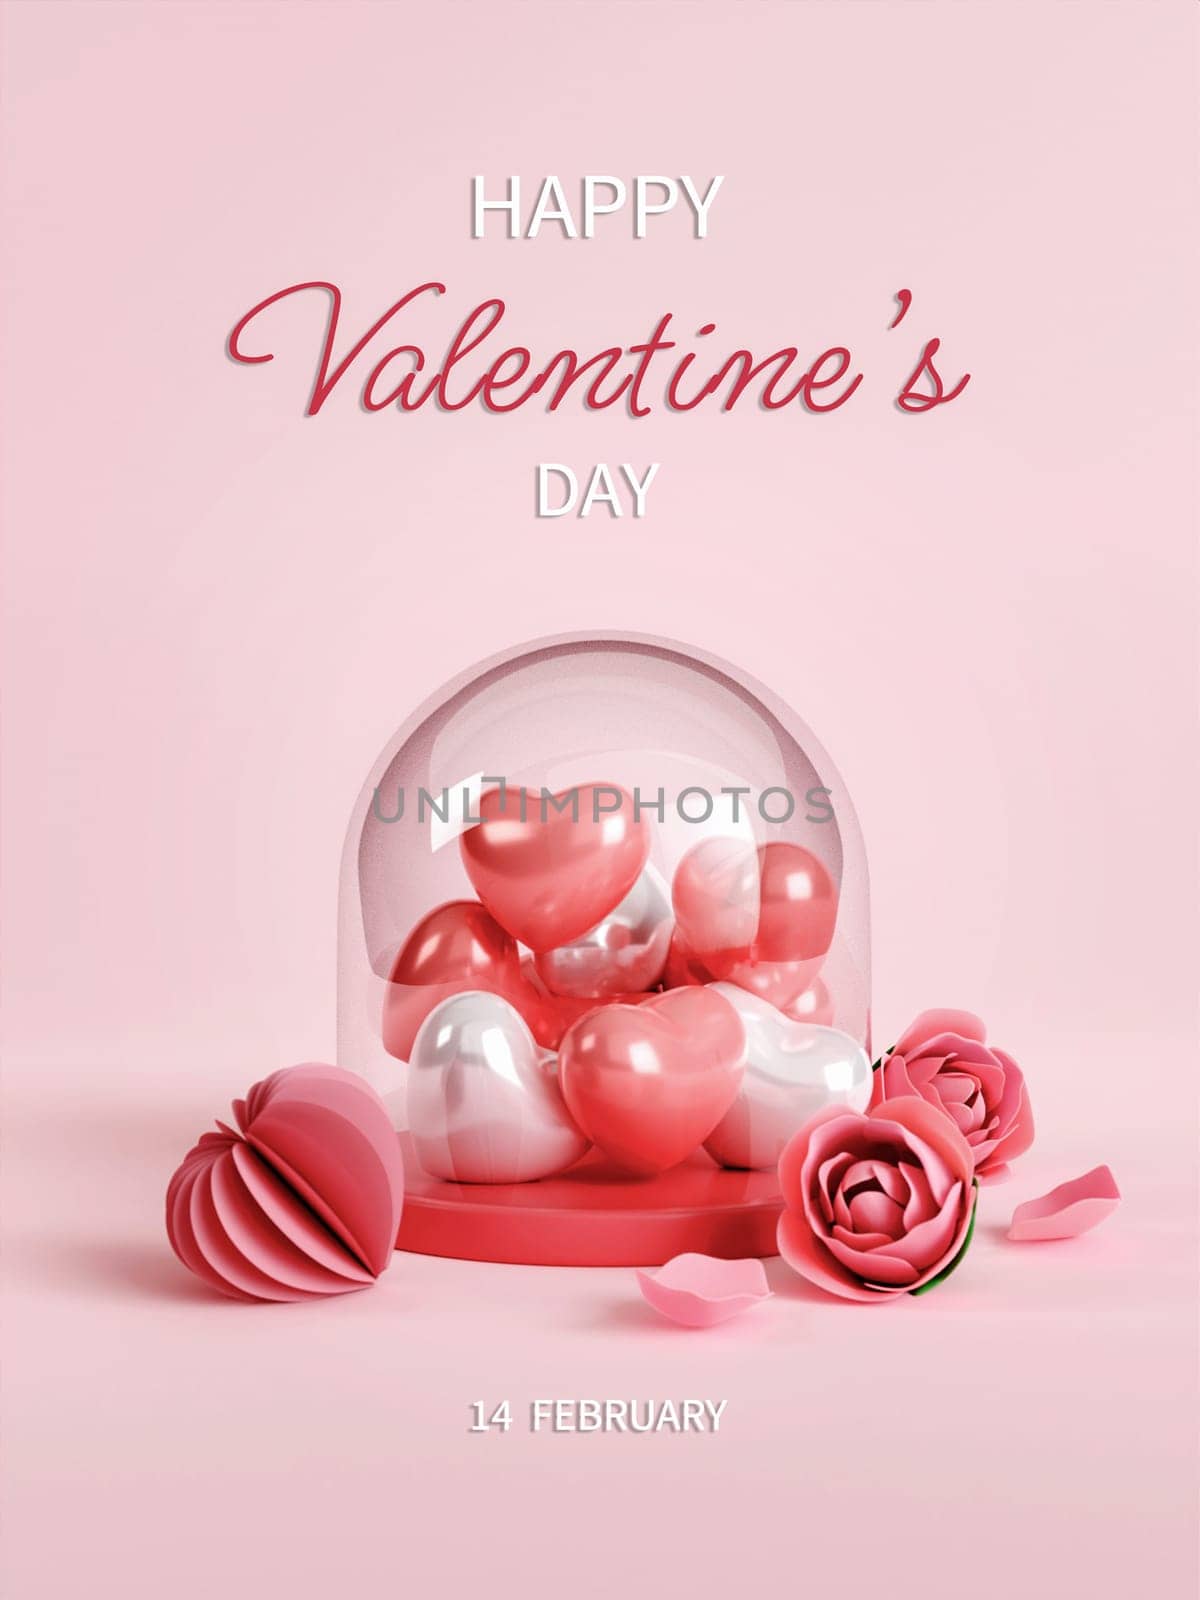 Valentines Day vertical social media story post with different types of hearts on a pink background and copy space in 3D rendering illustration. Love and romantic concept.